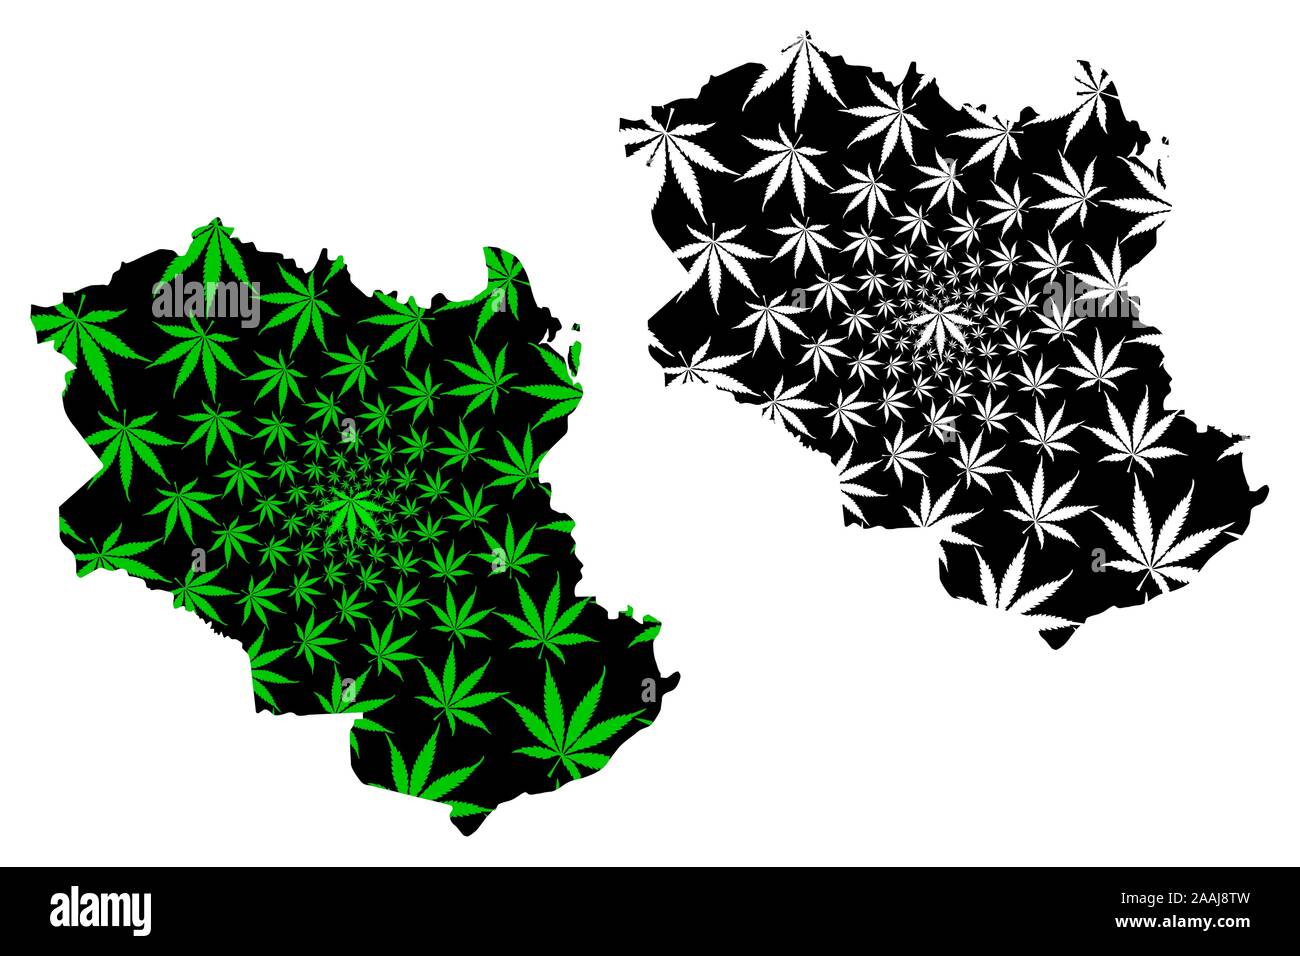 Monagas State (Bolivarian Republic of Venezuela, Federal Dependencies and Capital District)map is designed cannabis leaf green and black, Monagas map Stock Vector